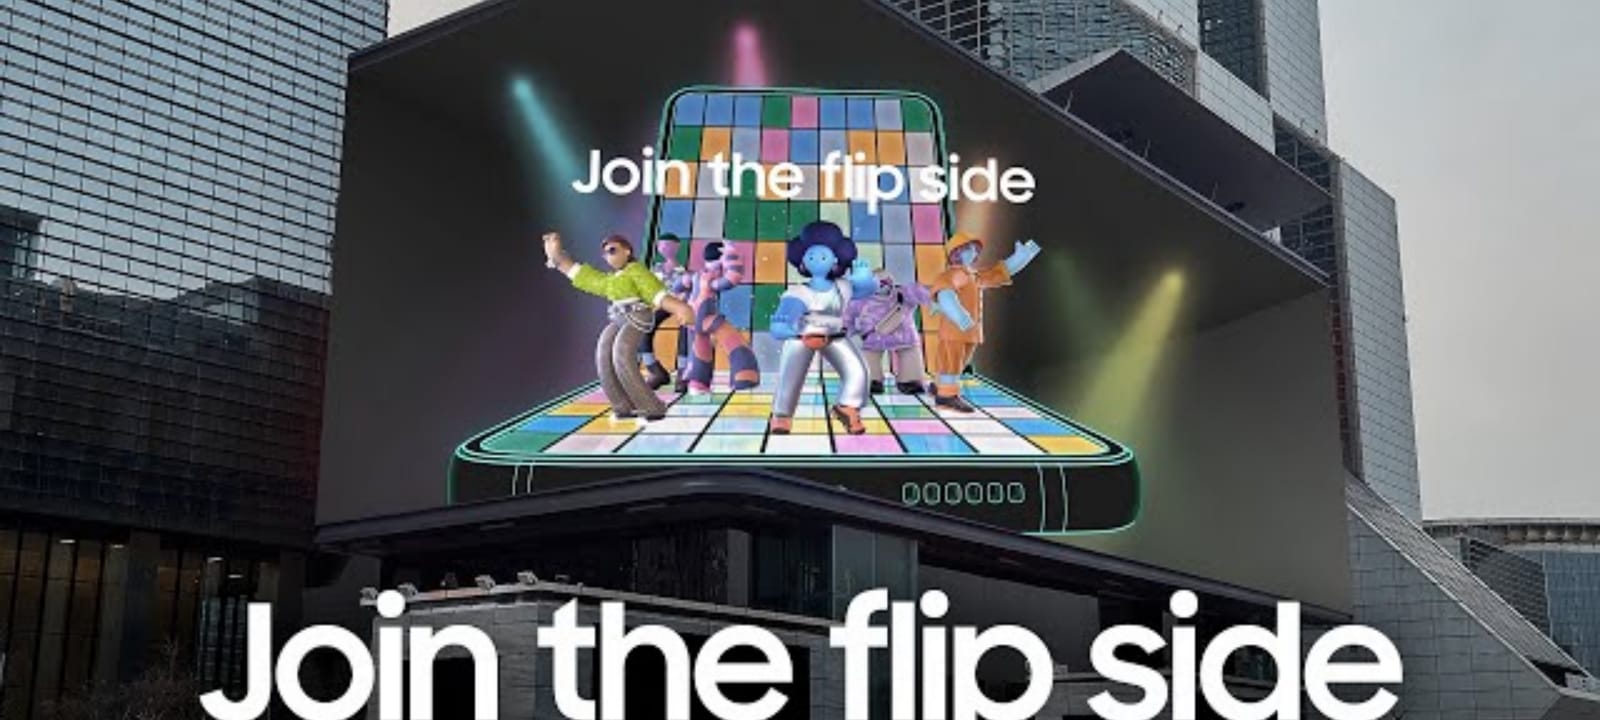 Samsung Unpacked: 'Join the flip side’ takes over the world